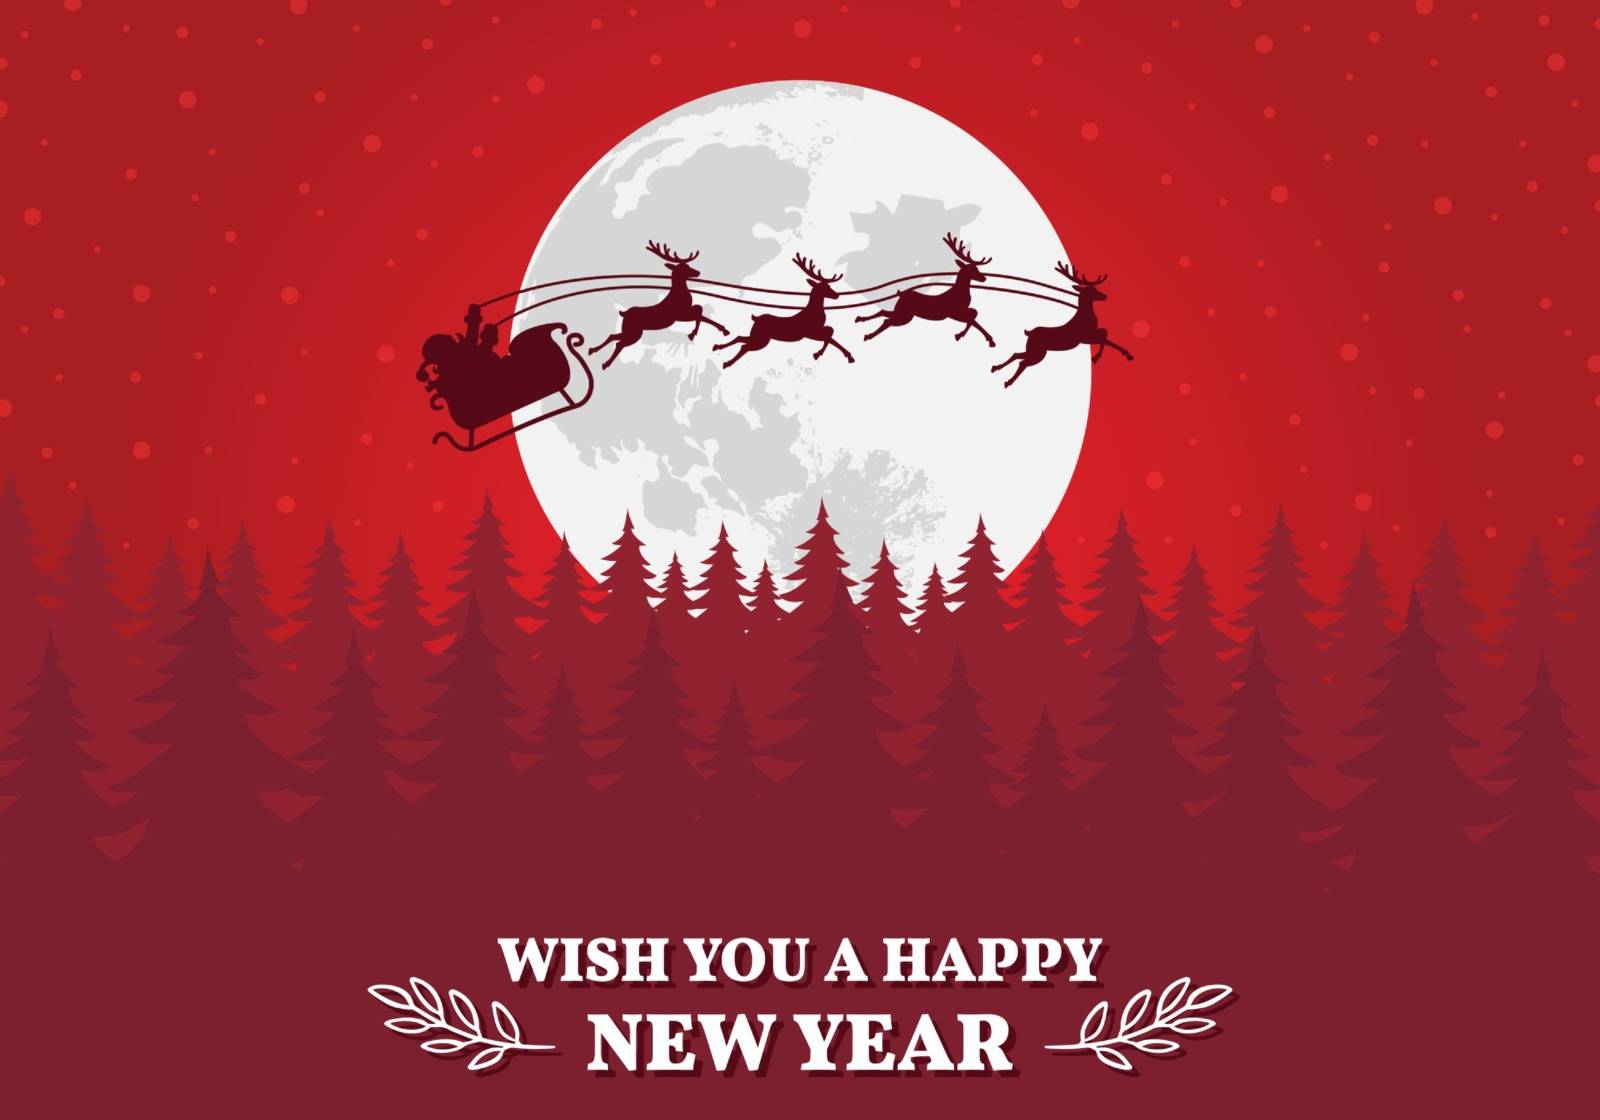 Merry Christmas and Happy New Year, Santa Claus in sleigh, Christmas landscape vector, background with moon and the silhouette of Santa Claus, Christmas scene with fir trees background. by Fox